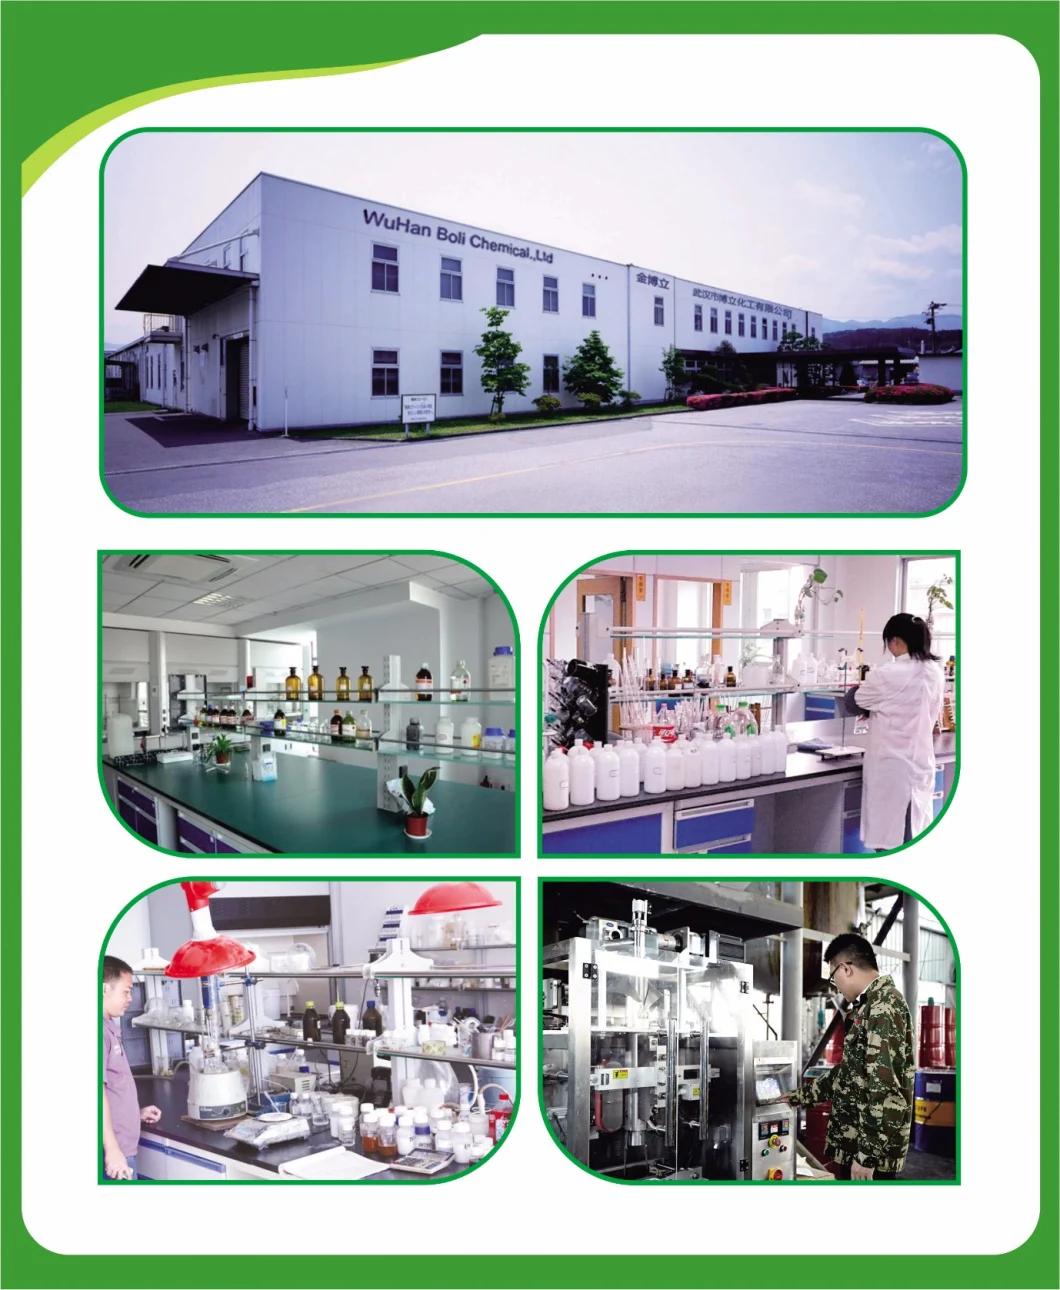 China Supplier GBL Spray Adhesive for Bonding Sponge and Wood